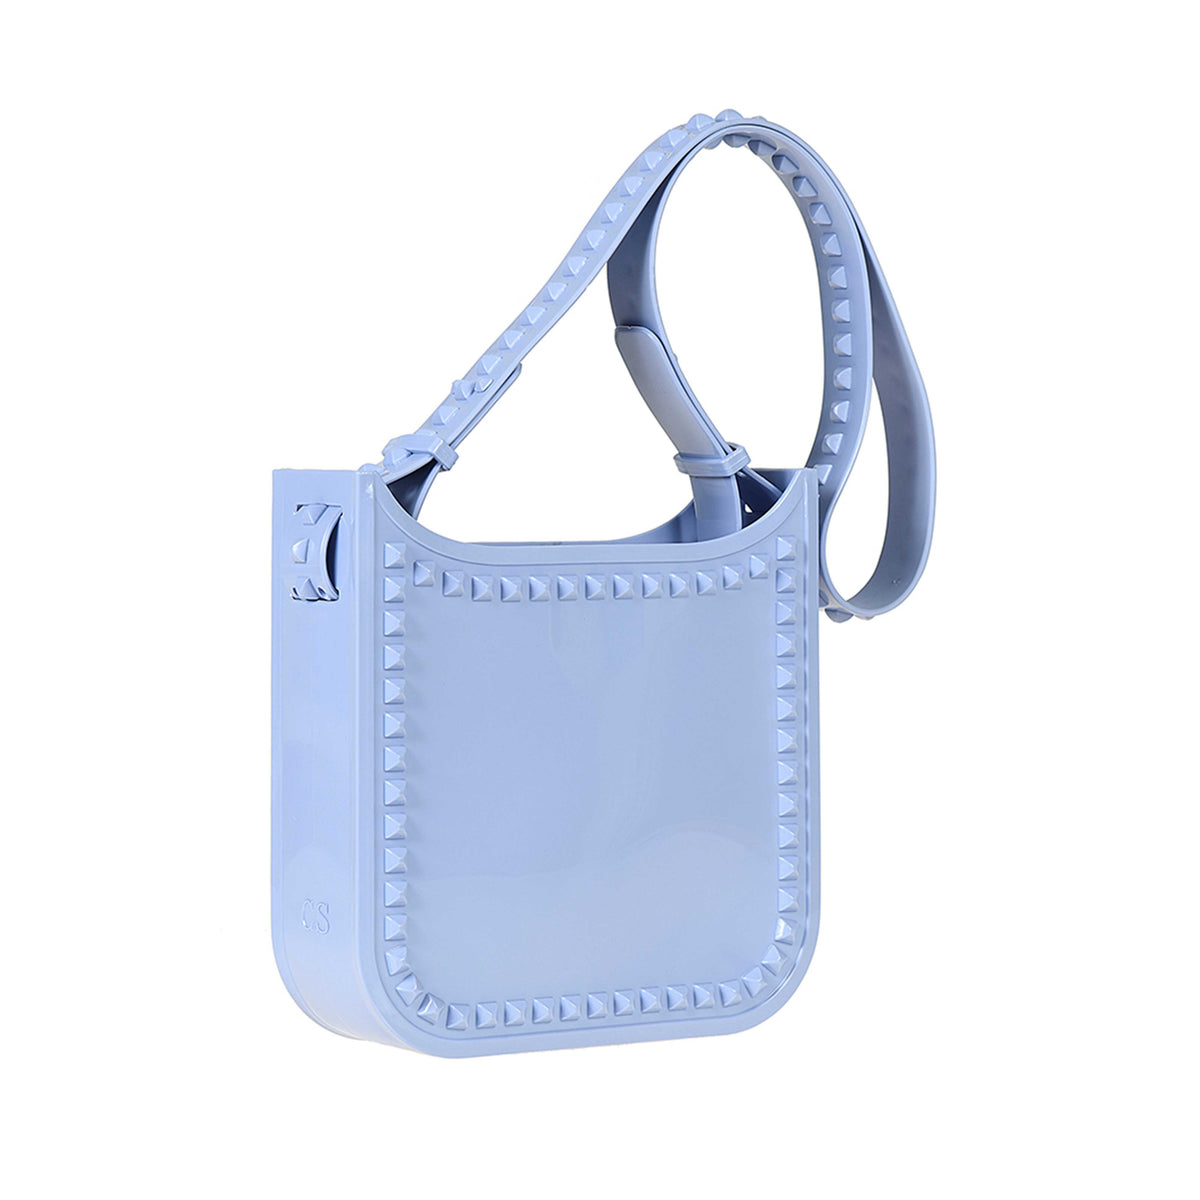 Toni mid jelly bags with studs on sale in color baby blue